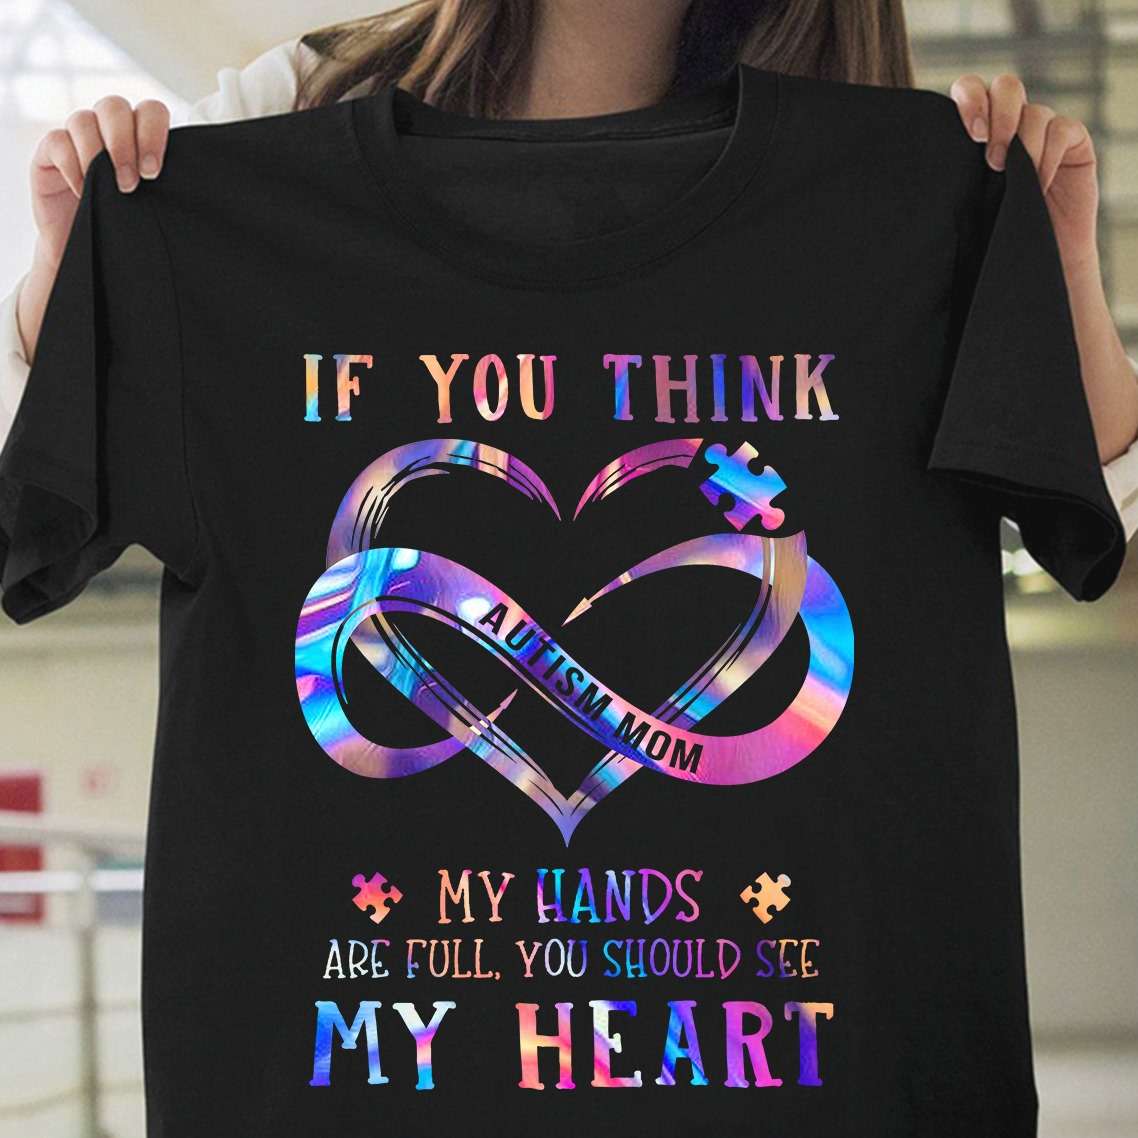 If you think my hands are full, you should see my heart - Autism mom, autism awareness T-shirt